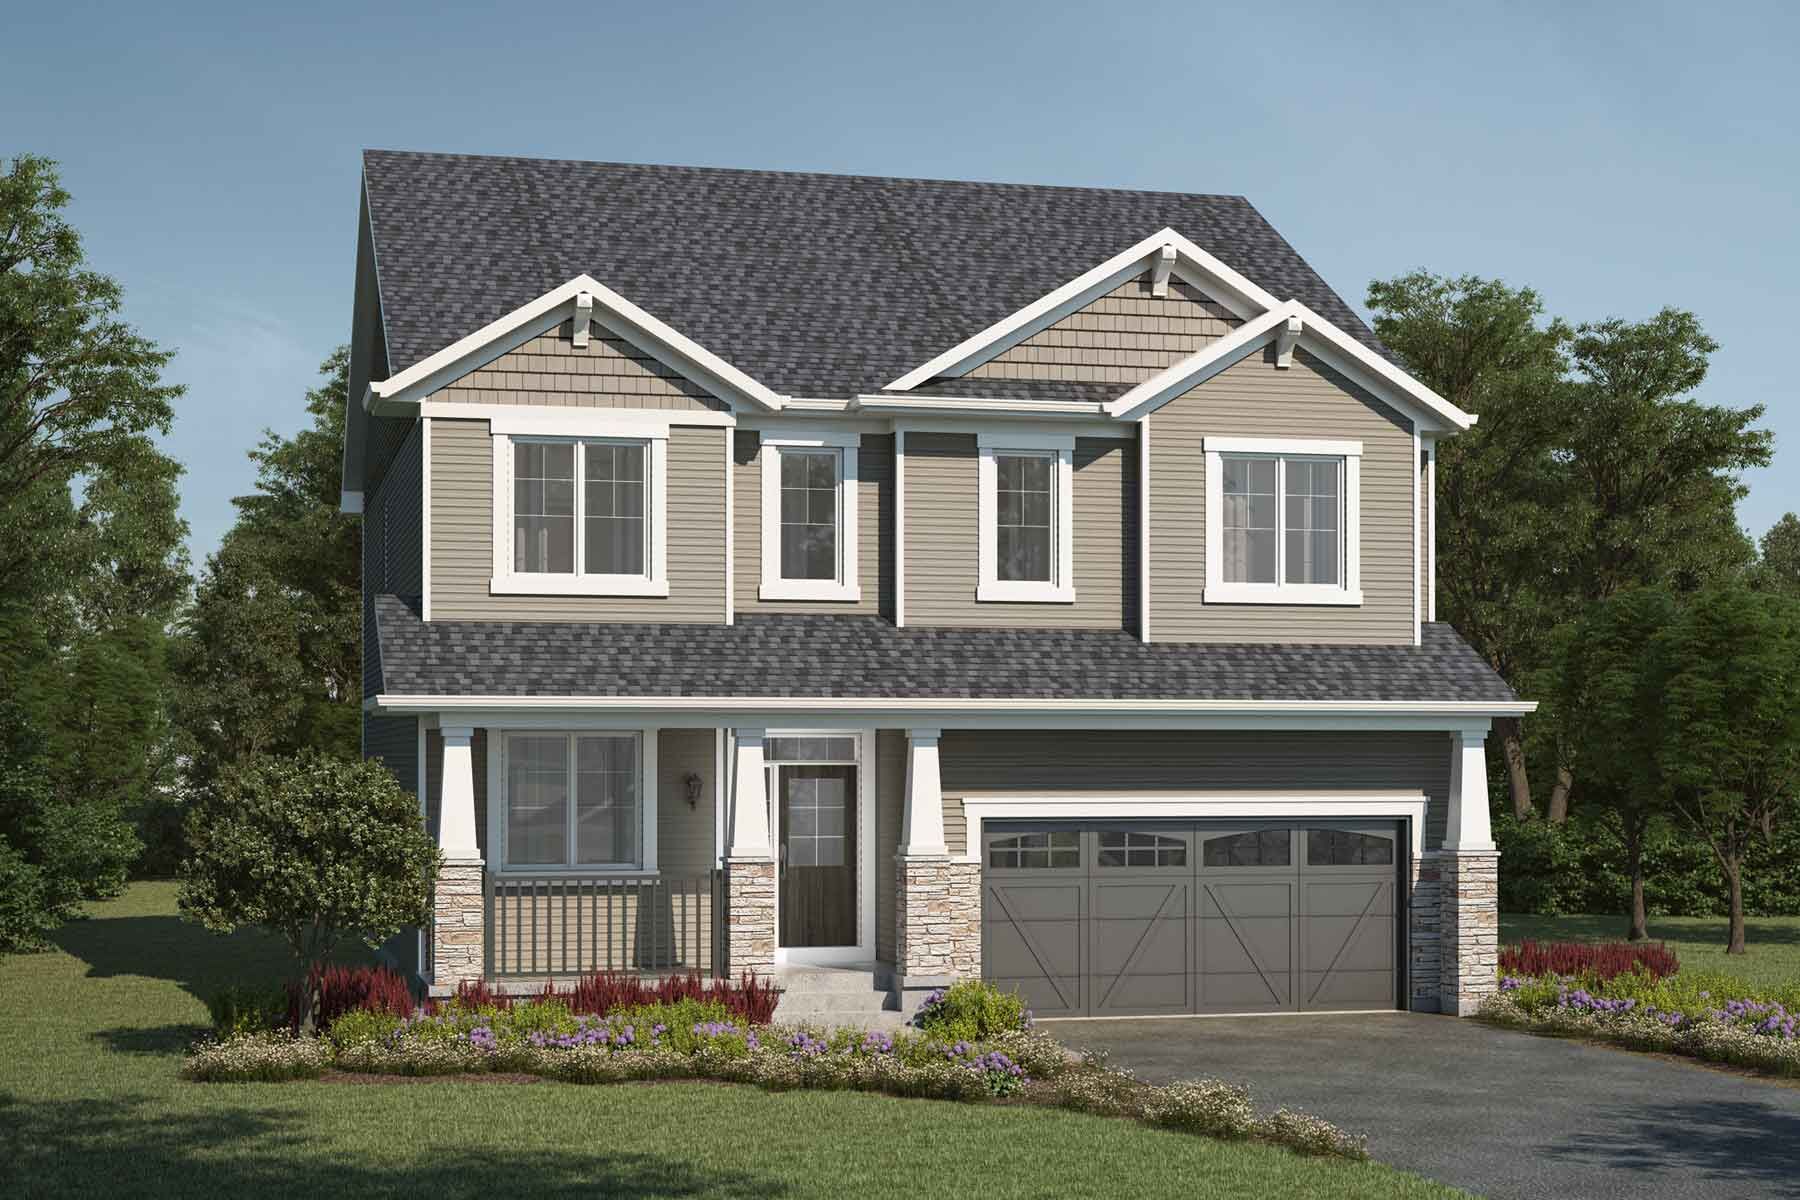 A Craftsman style detached home with a double car garage.